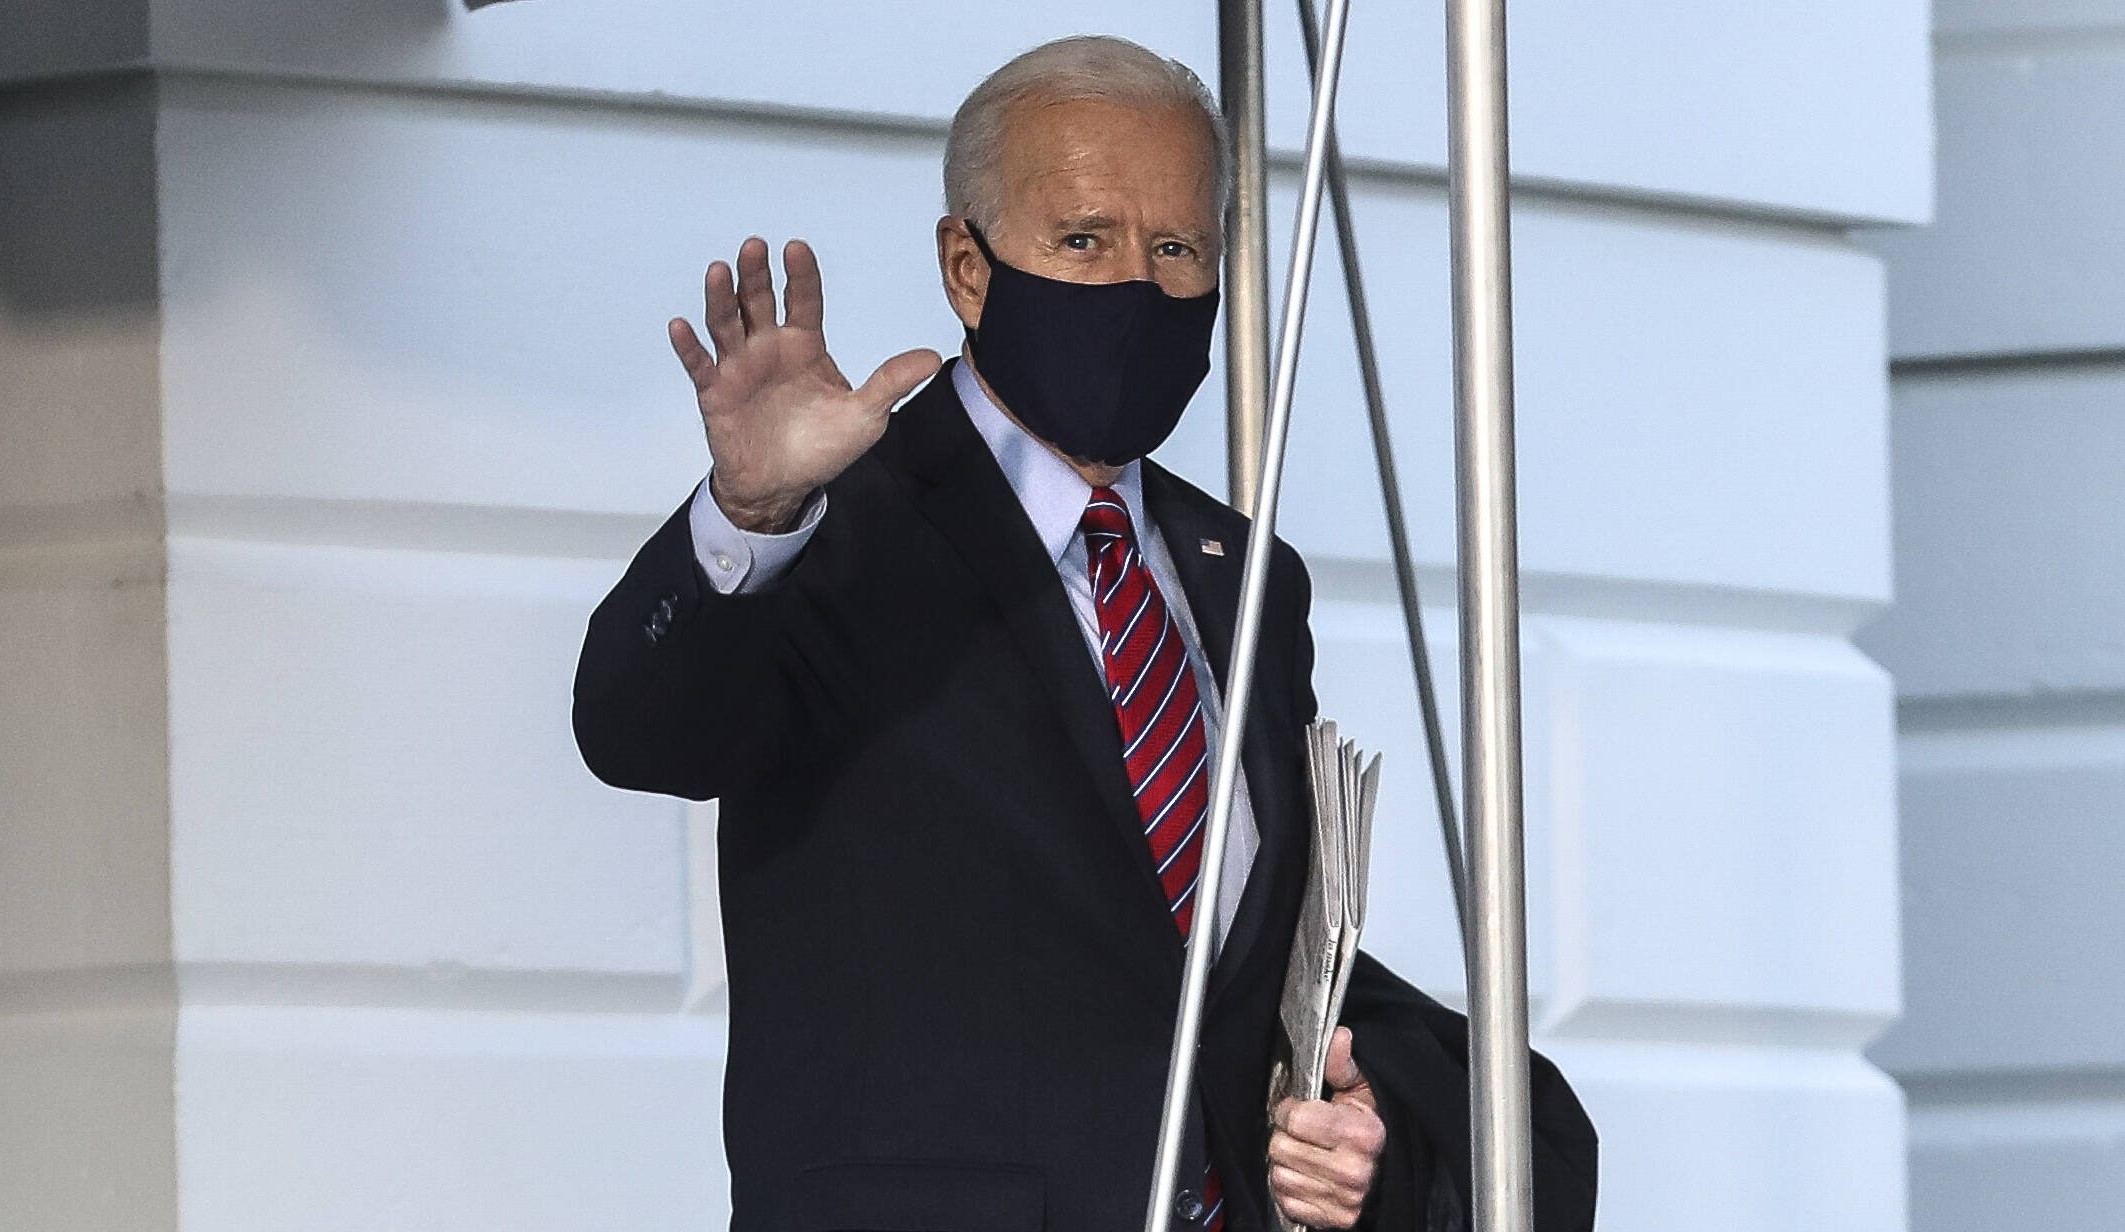 International Politics - Biden expects an "intense competition" between the United States and China